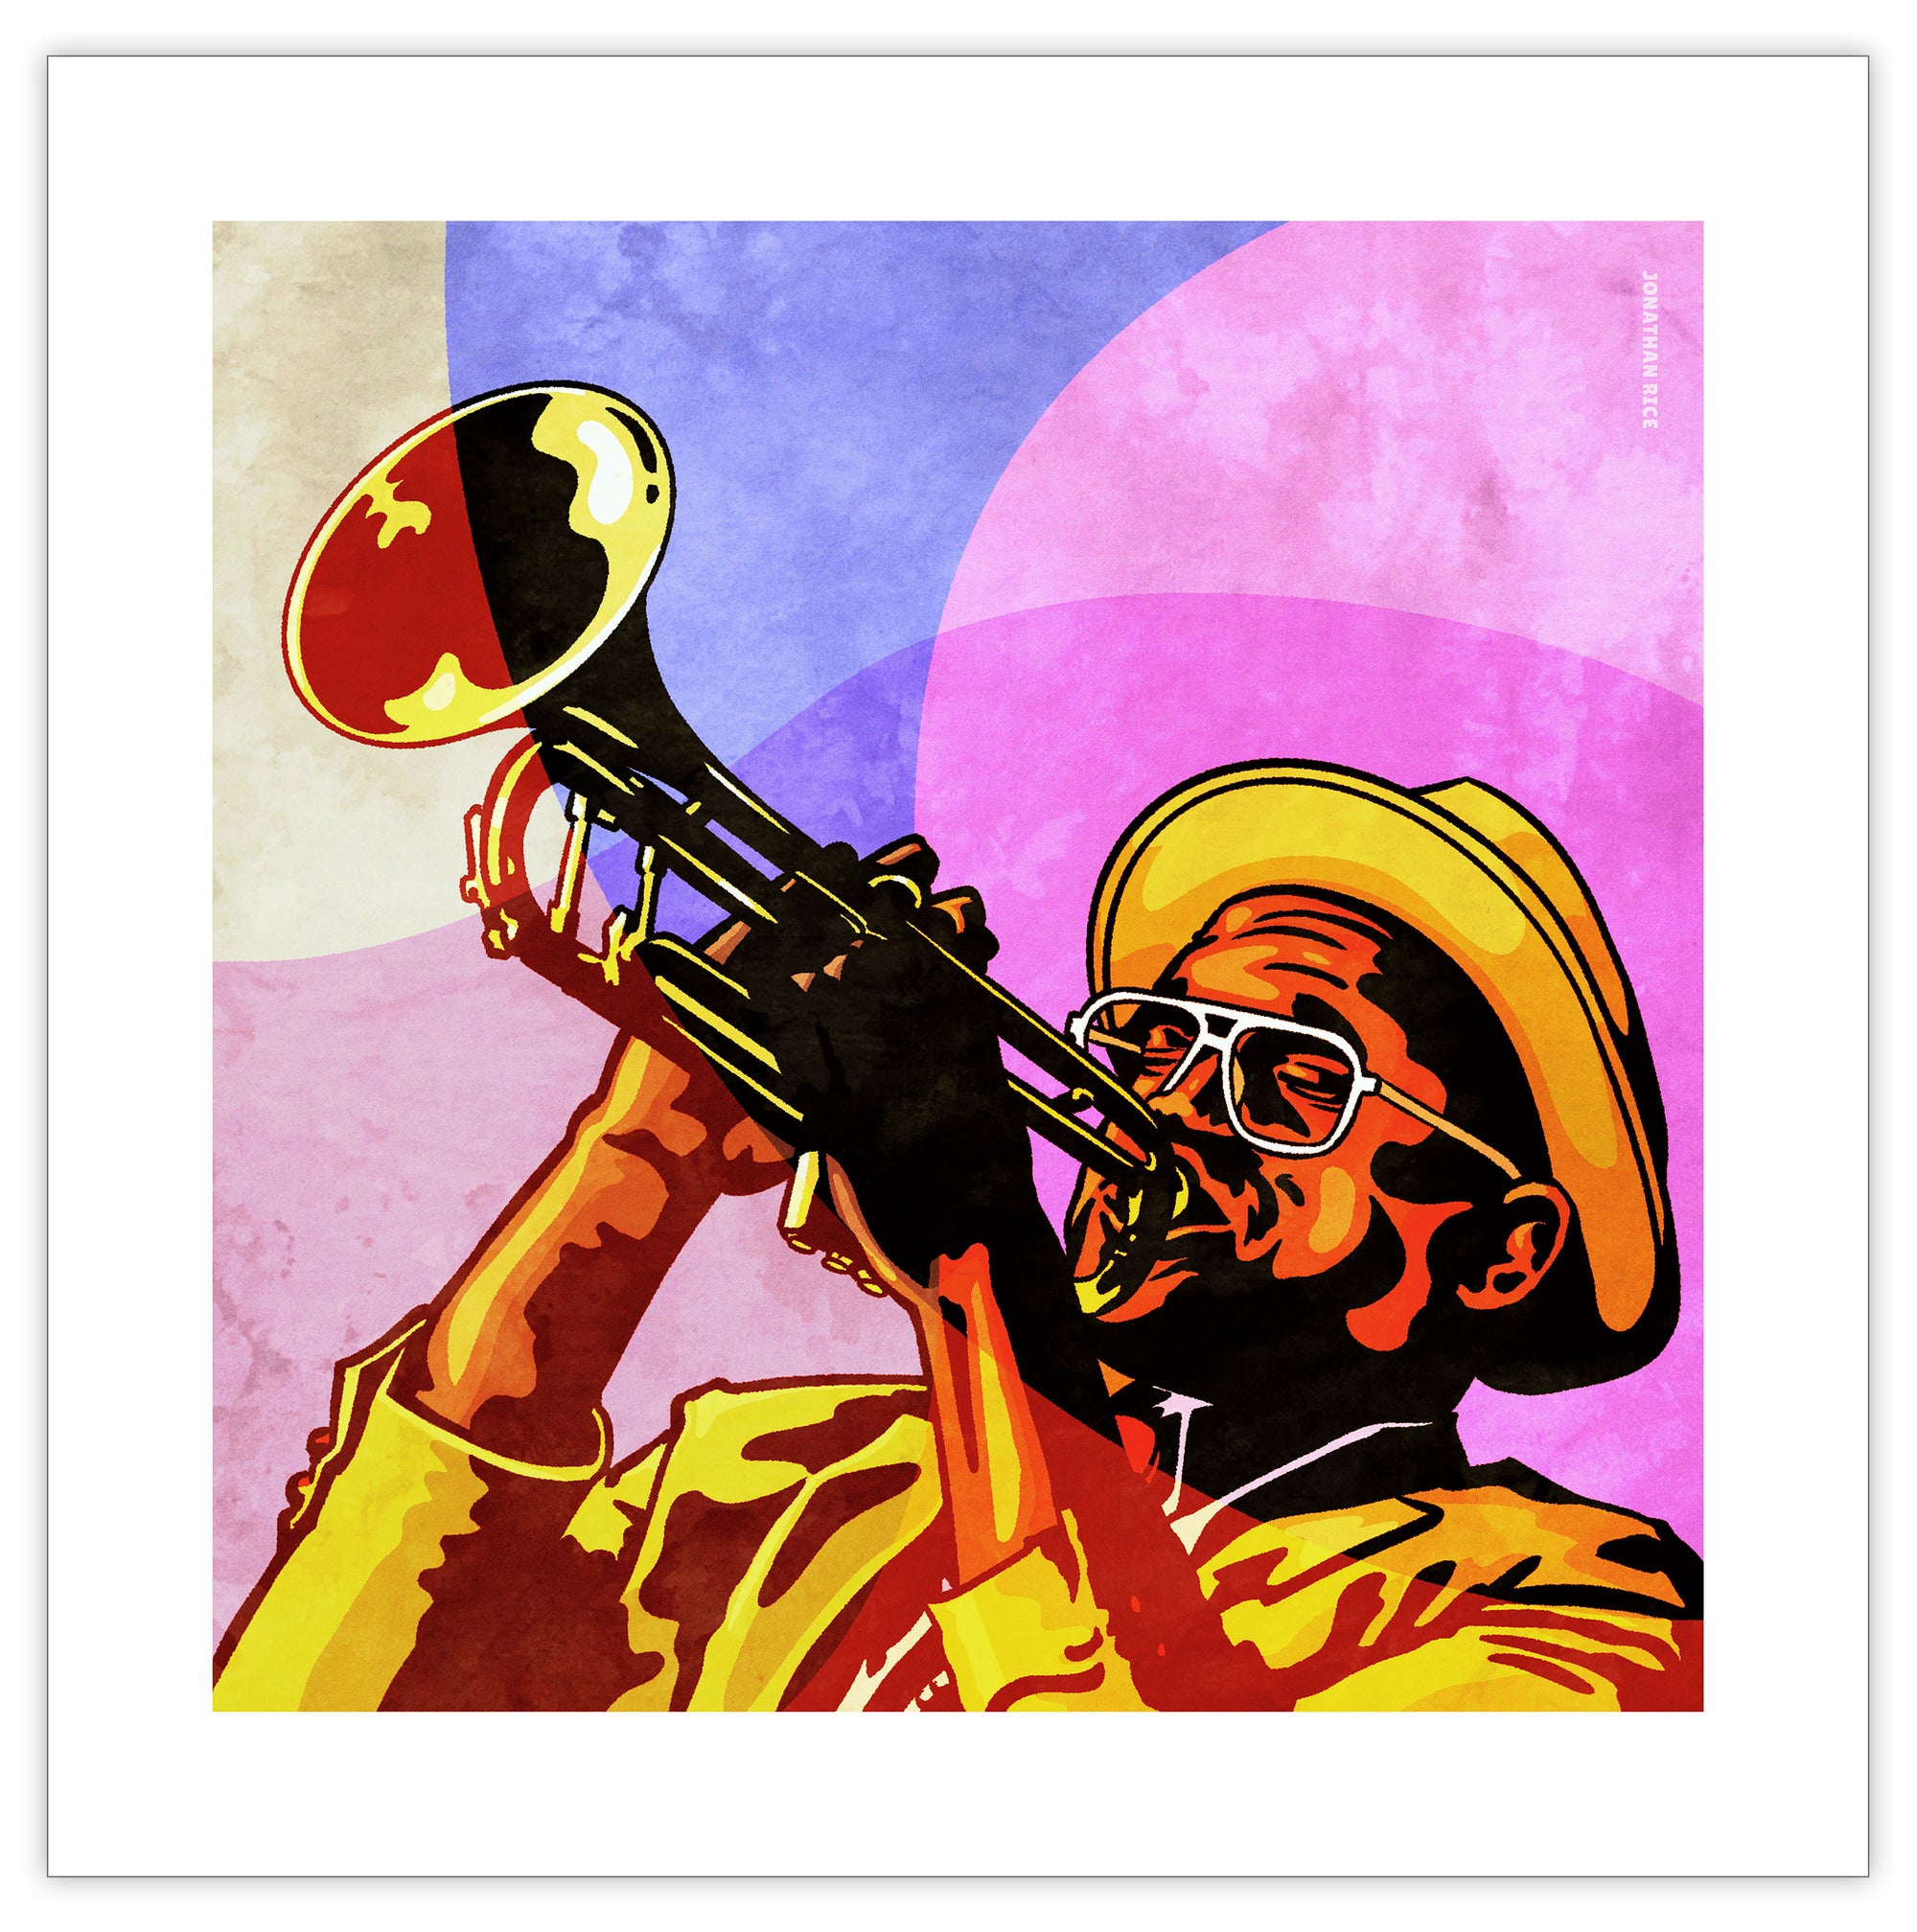 An upbeat and colorful print of New Orleans Jazz Trumpeter Branden Lewis. Bold graphic lines and bright colorful shapes create an energetic portrait of the black musician. 